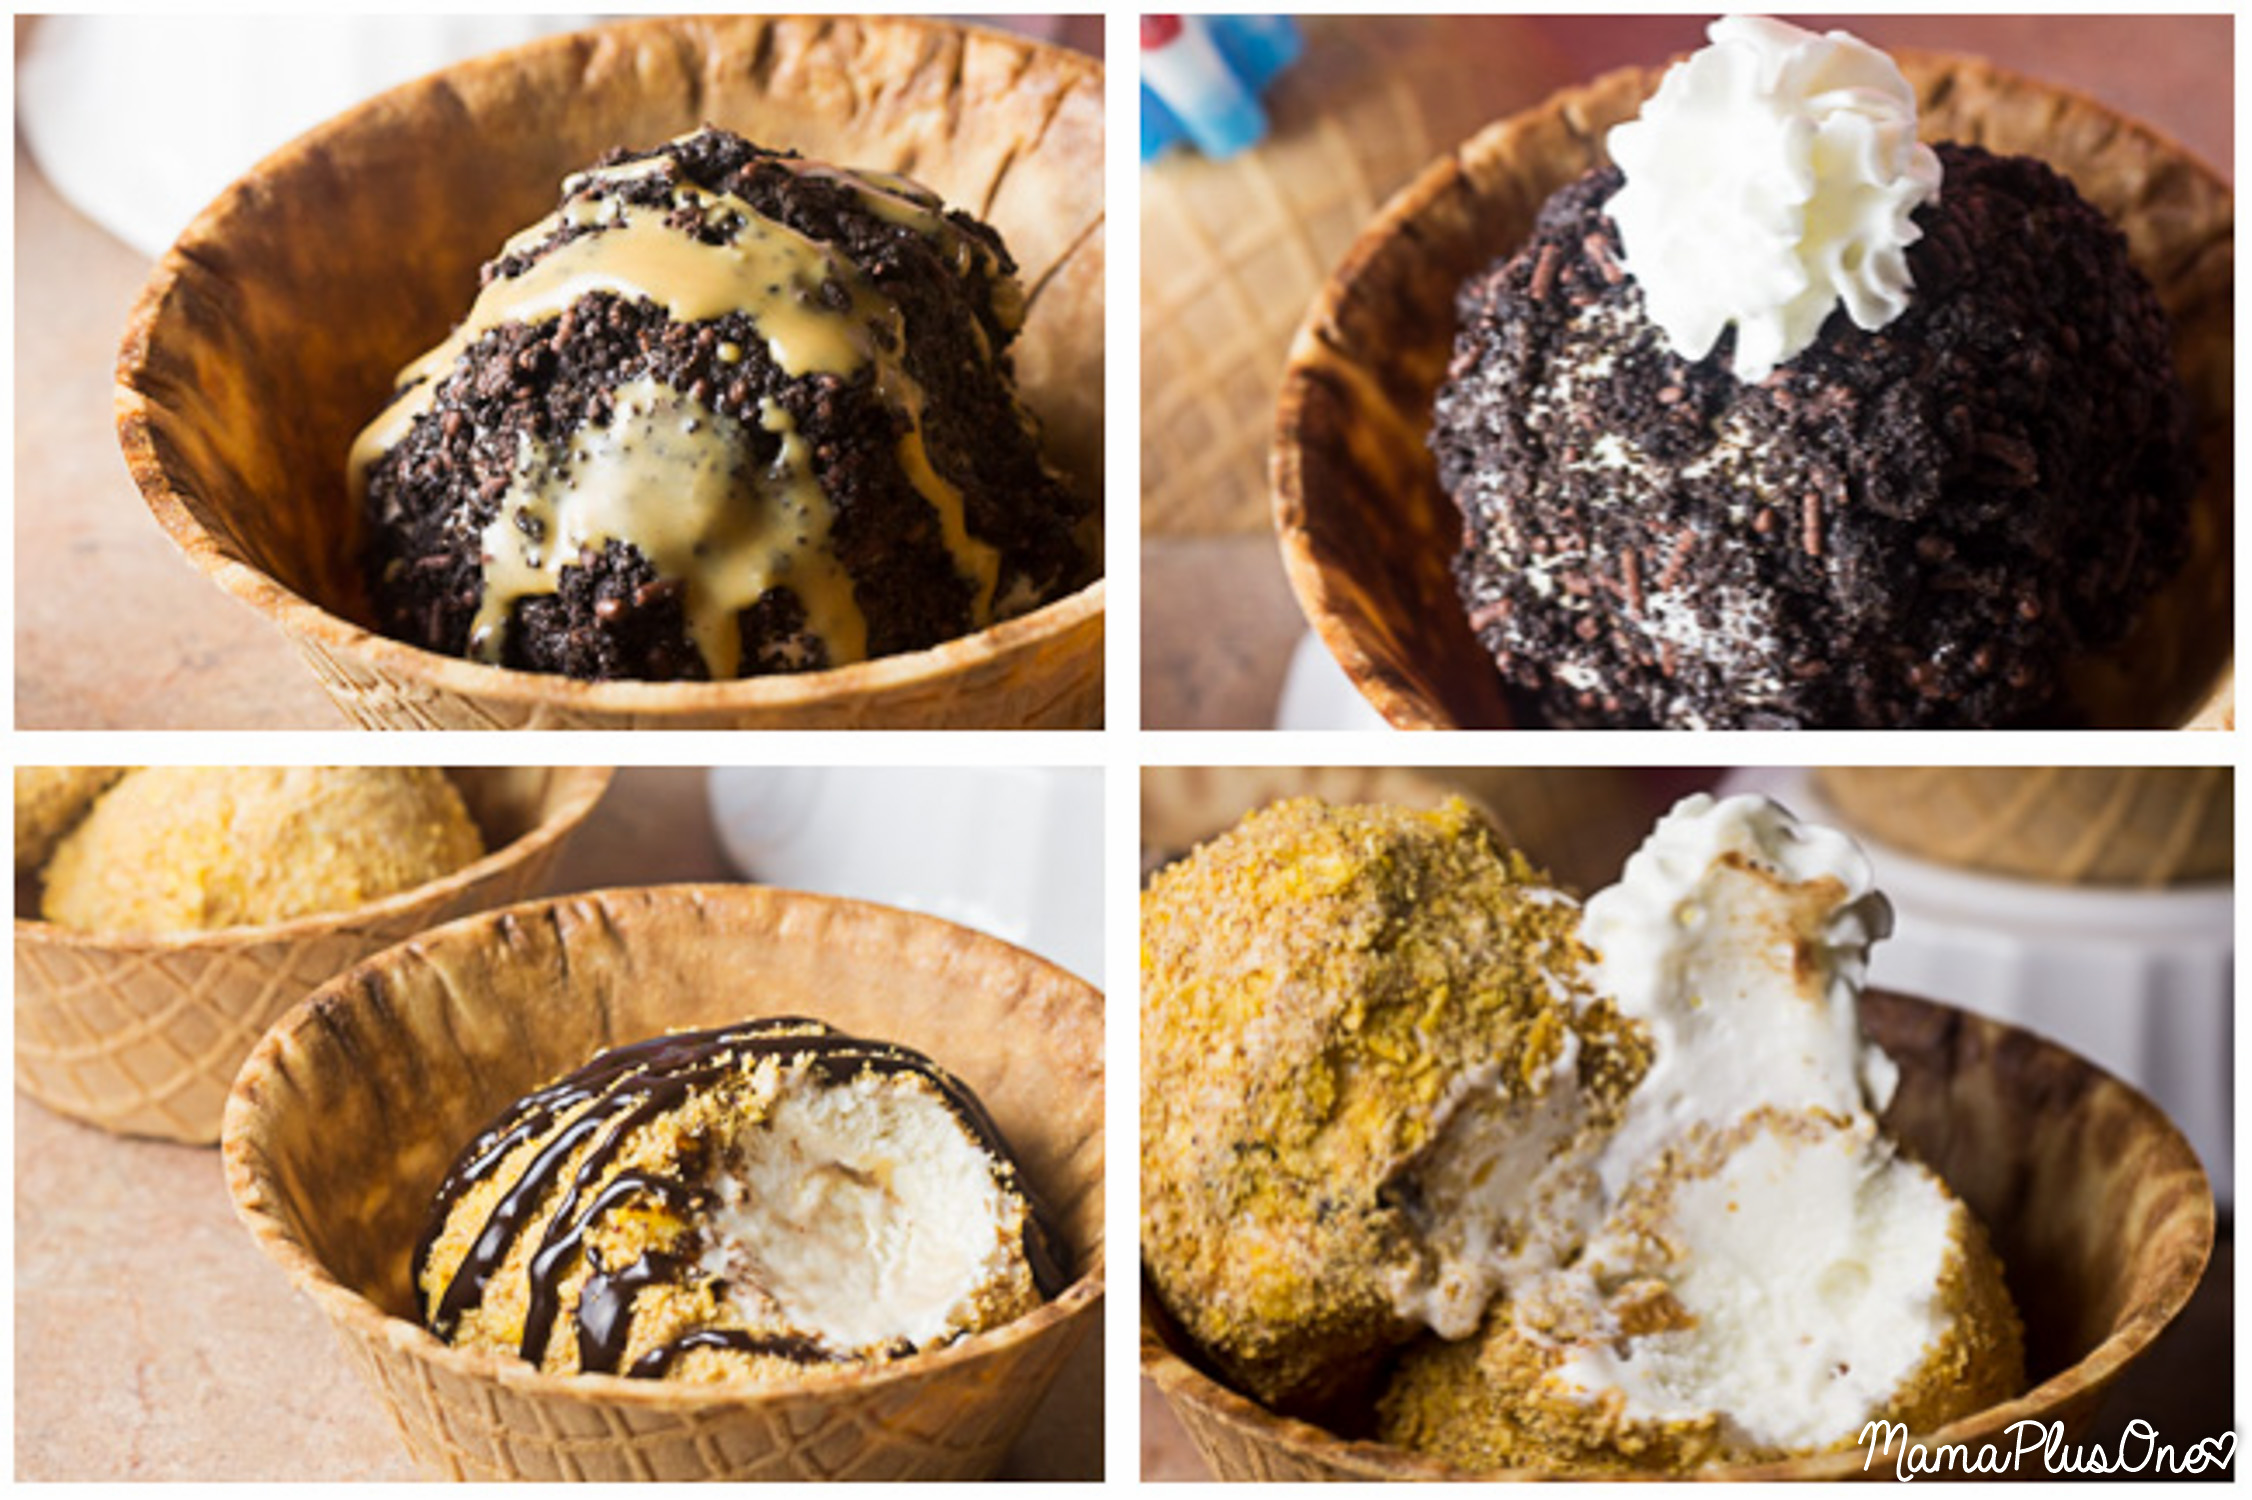 Fried Ice Cream can get messy... so here's all the fried ice cream flavor without the hassle of frying it! This unfried ice cream is easy to make, perfect for summer, and can be made with all of your favorite Blue Bunny ice cream flavors! #SoHoppinGood #BlueBunny #BombPop [ad]